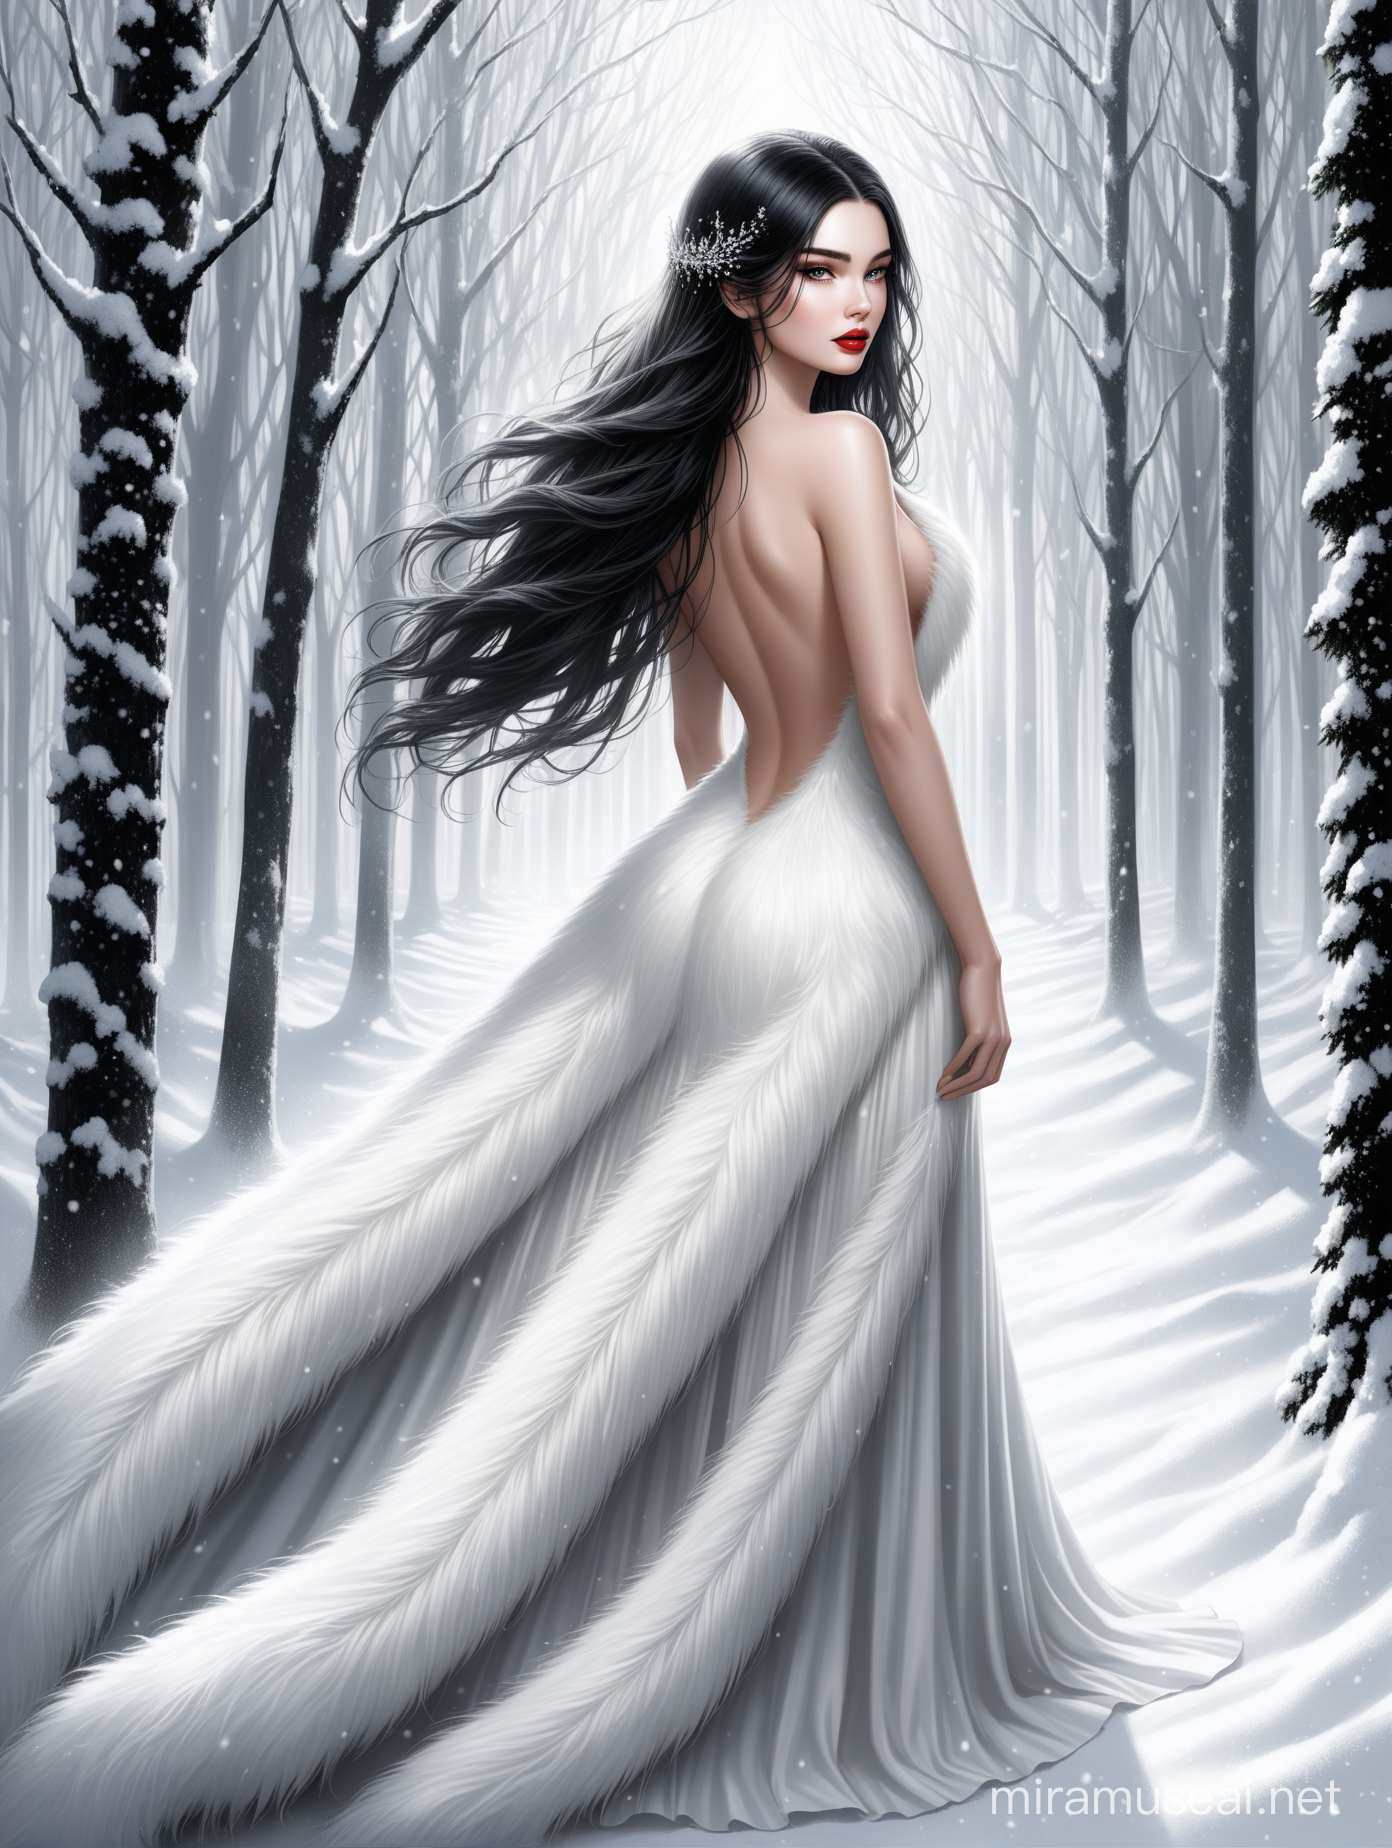 Elegant Young Woman in Snowy Forest Enchanting Black and White Fantasy Portrait